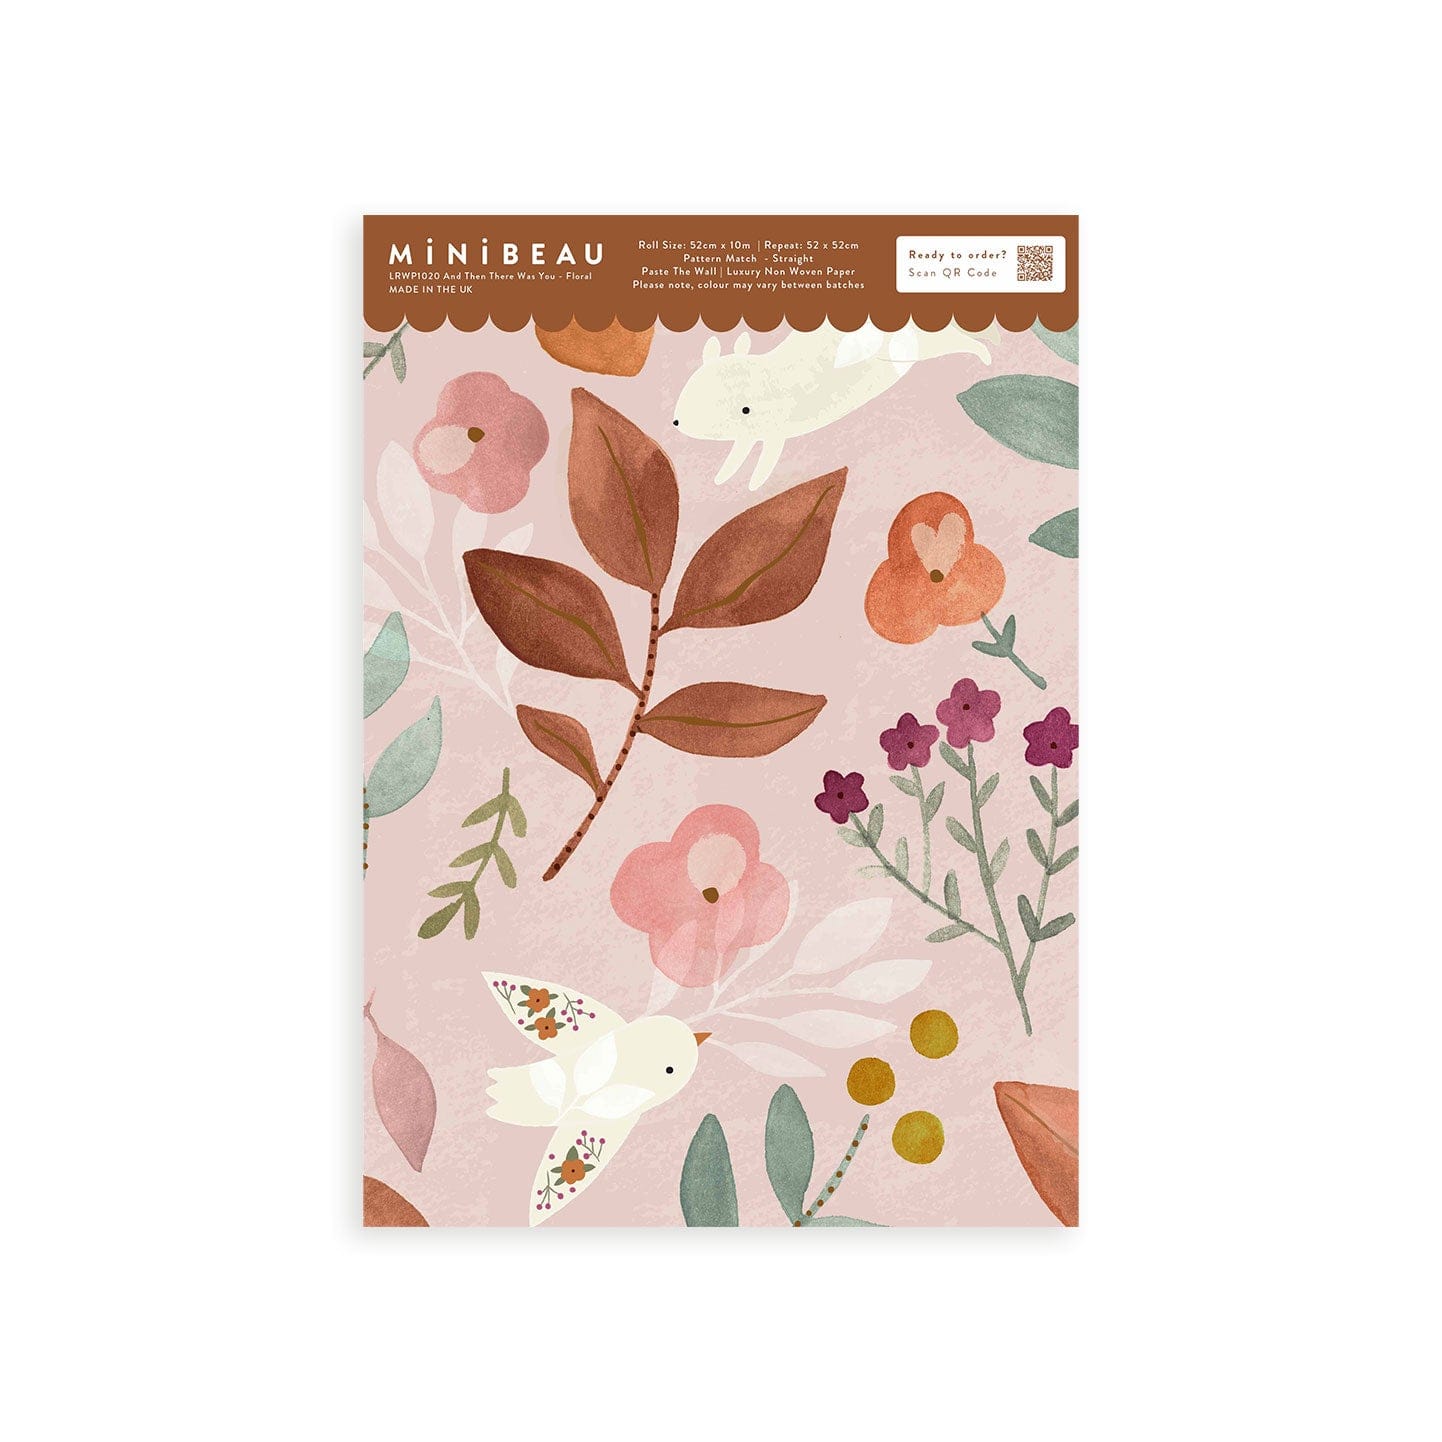 Wallpaper sample of vintage pink background with cream birds and squirrels with floral detailing. vintage pink and orange flowers with green leaves.